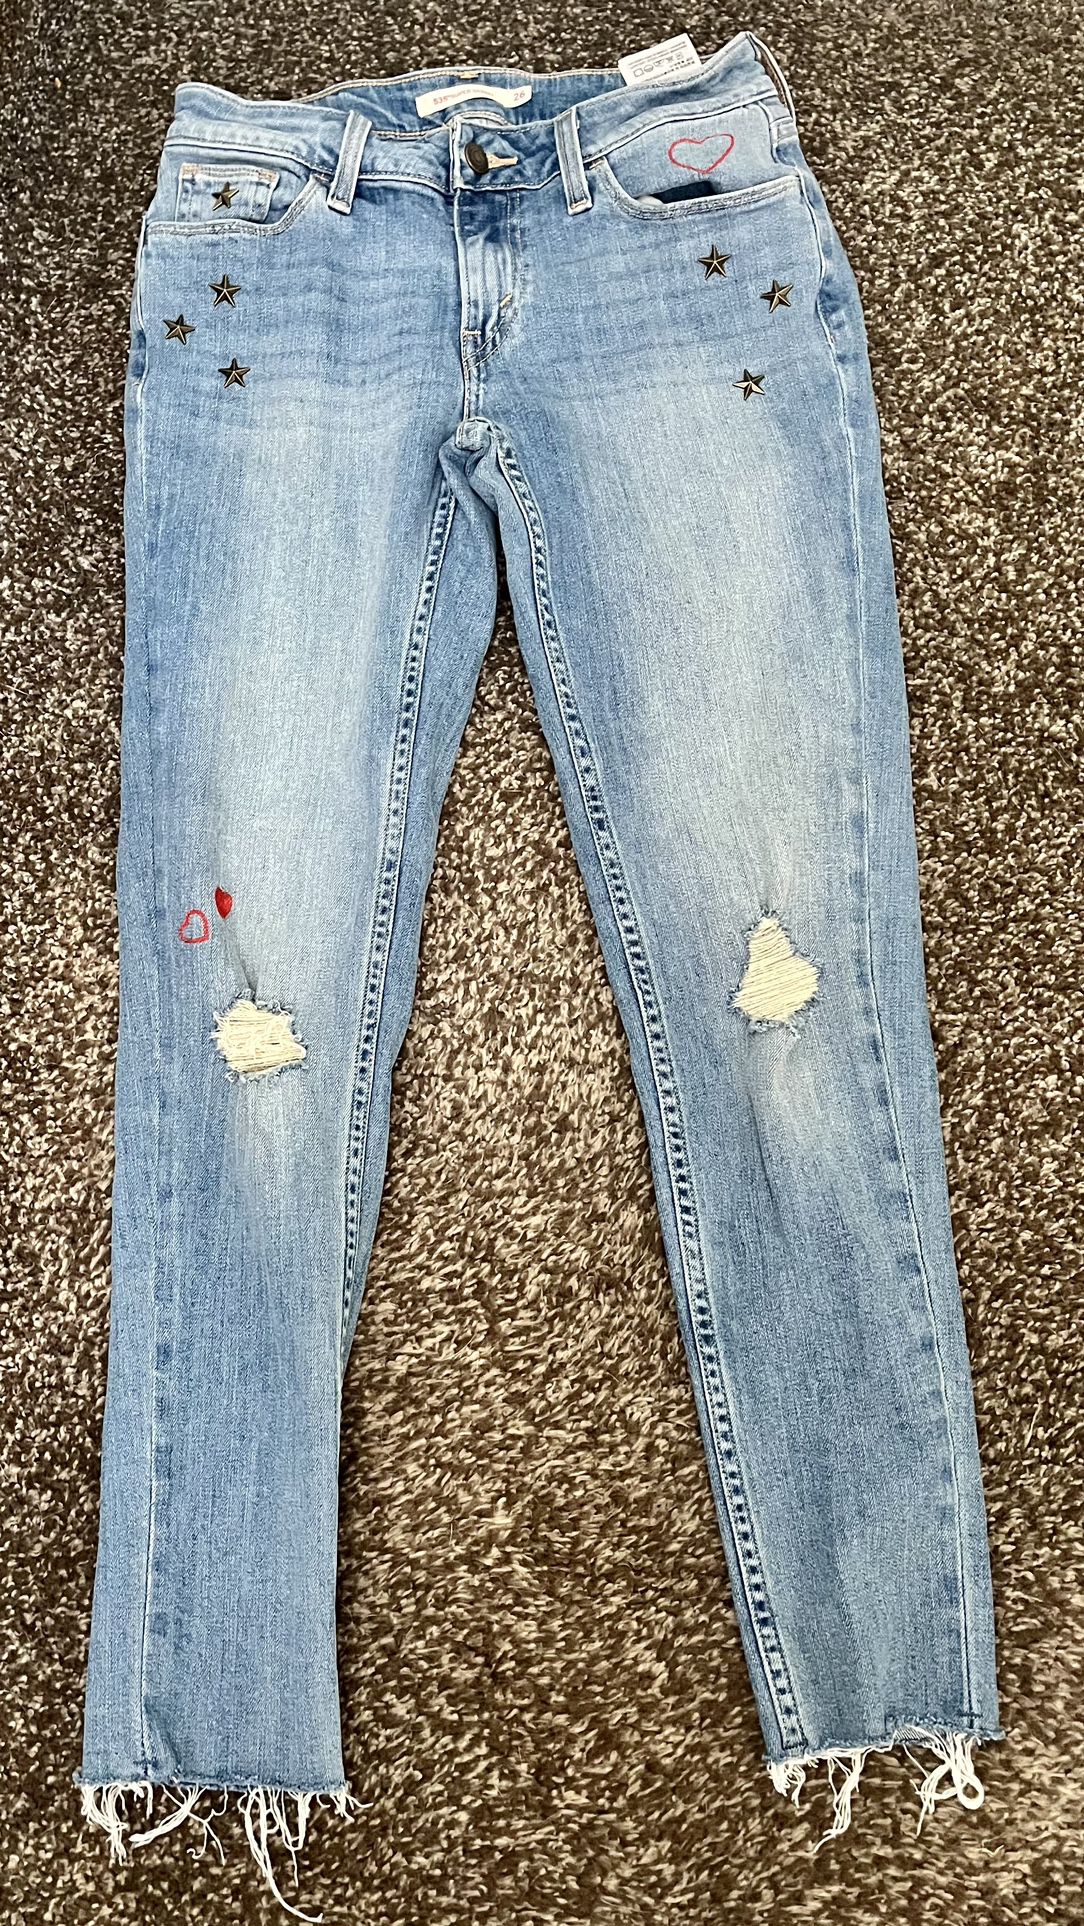 Levi 535 super skinny jeans- BEAND NEW- so cute! Size 26